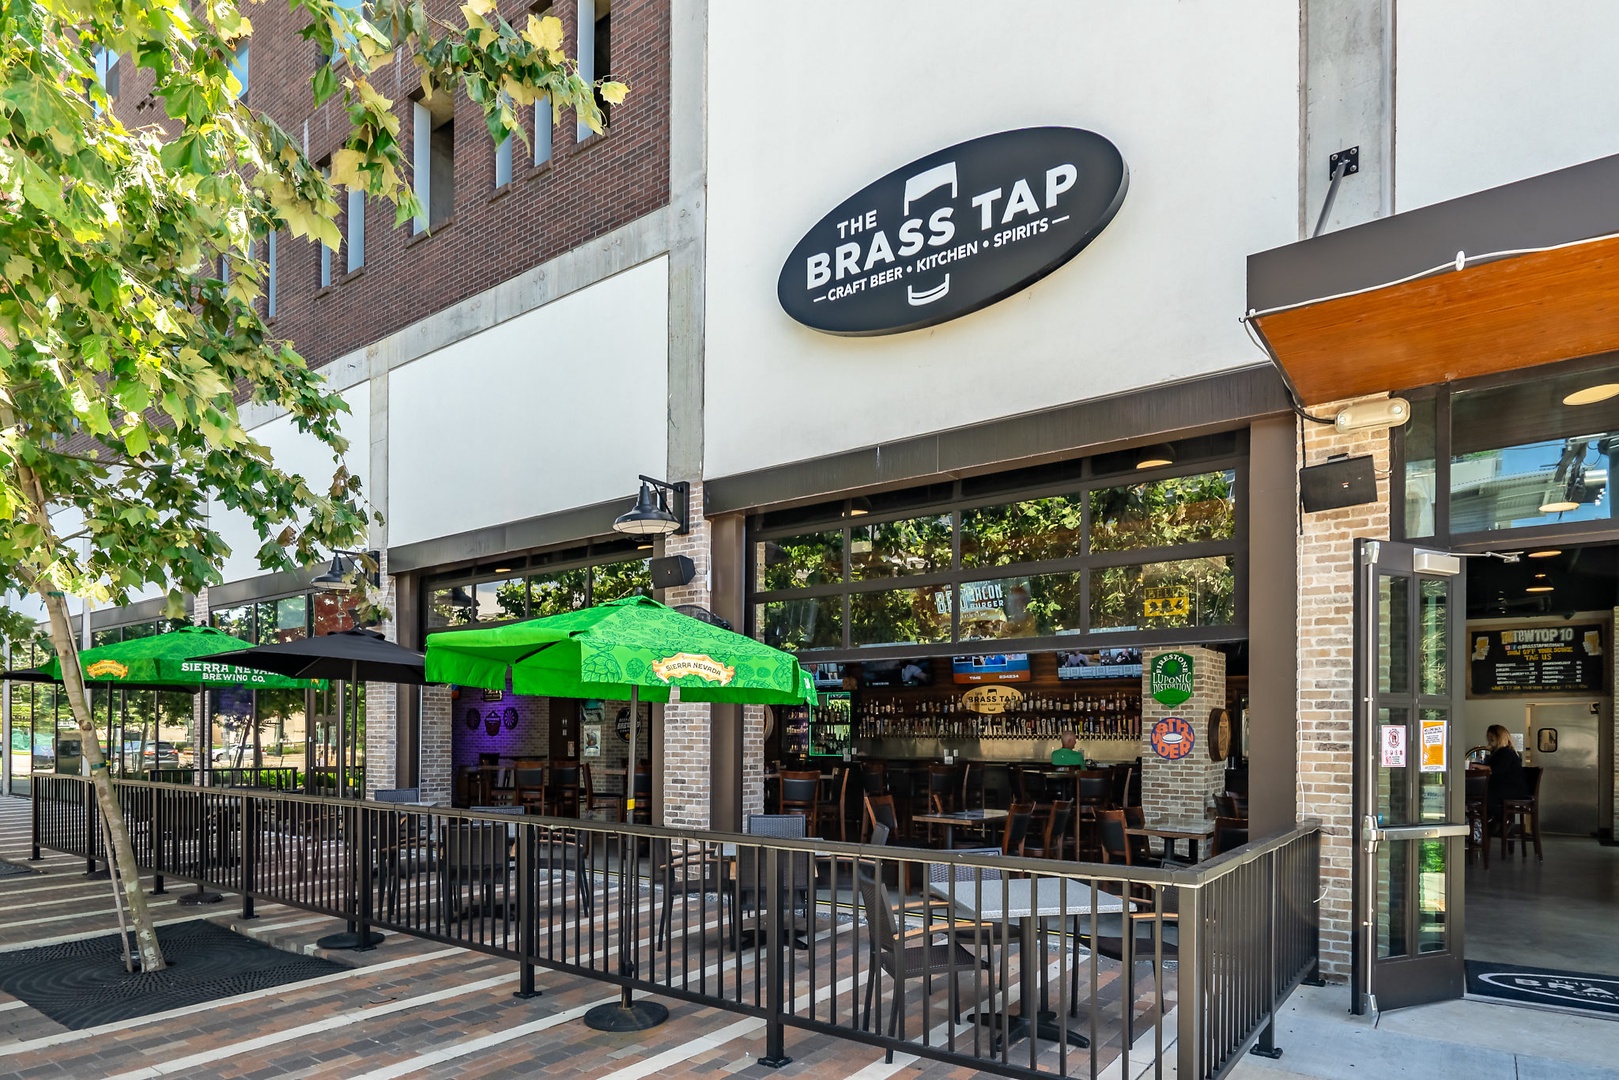 Local bar The Brass Tap is located on the ground floor (10% discount for our guests)